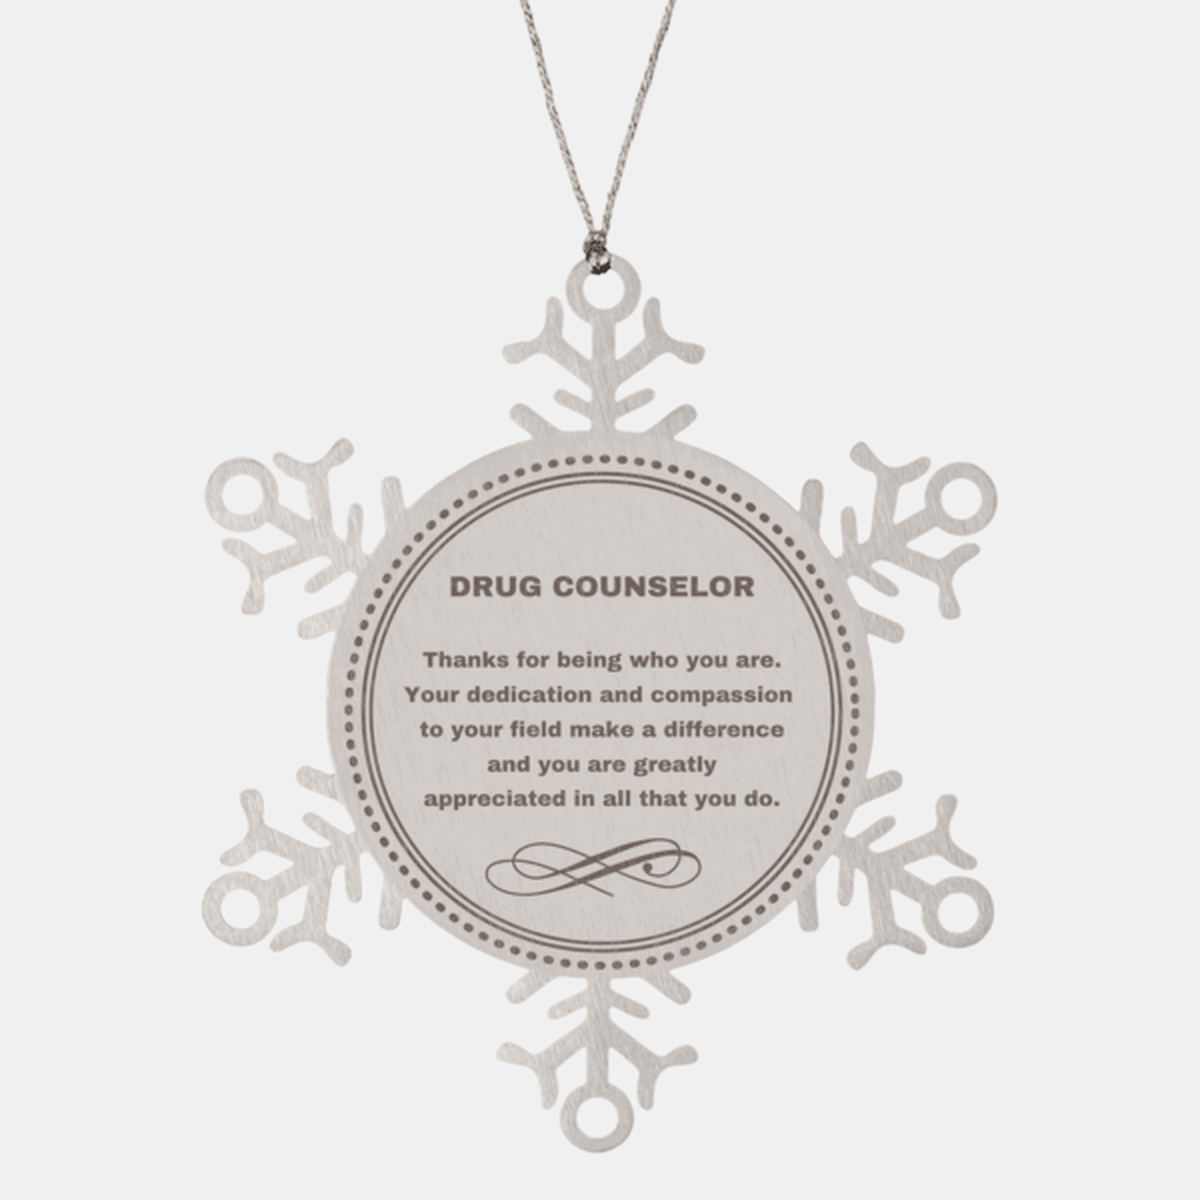 Drug Counselor Snowflake Ornament - Thanks for being who you are - Birthday Christmas Jewelry Gifts Coworkers Colleague Boss - Mallard Moon Gift Shop